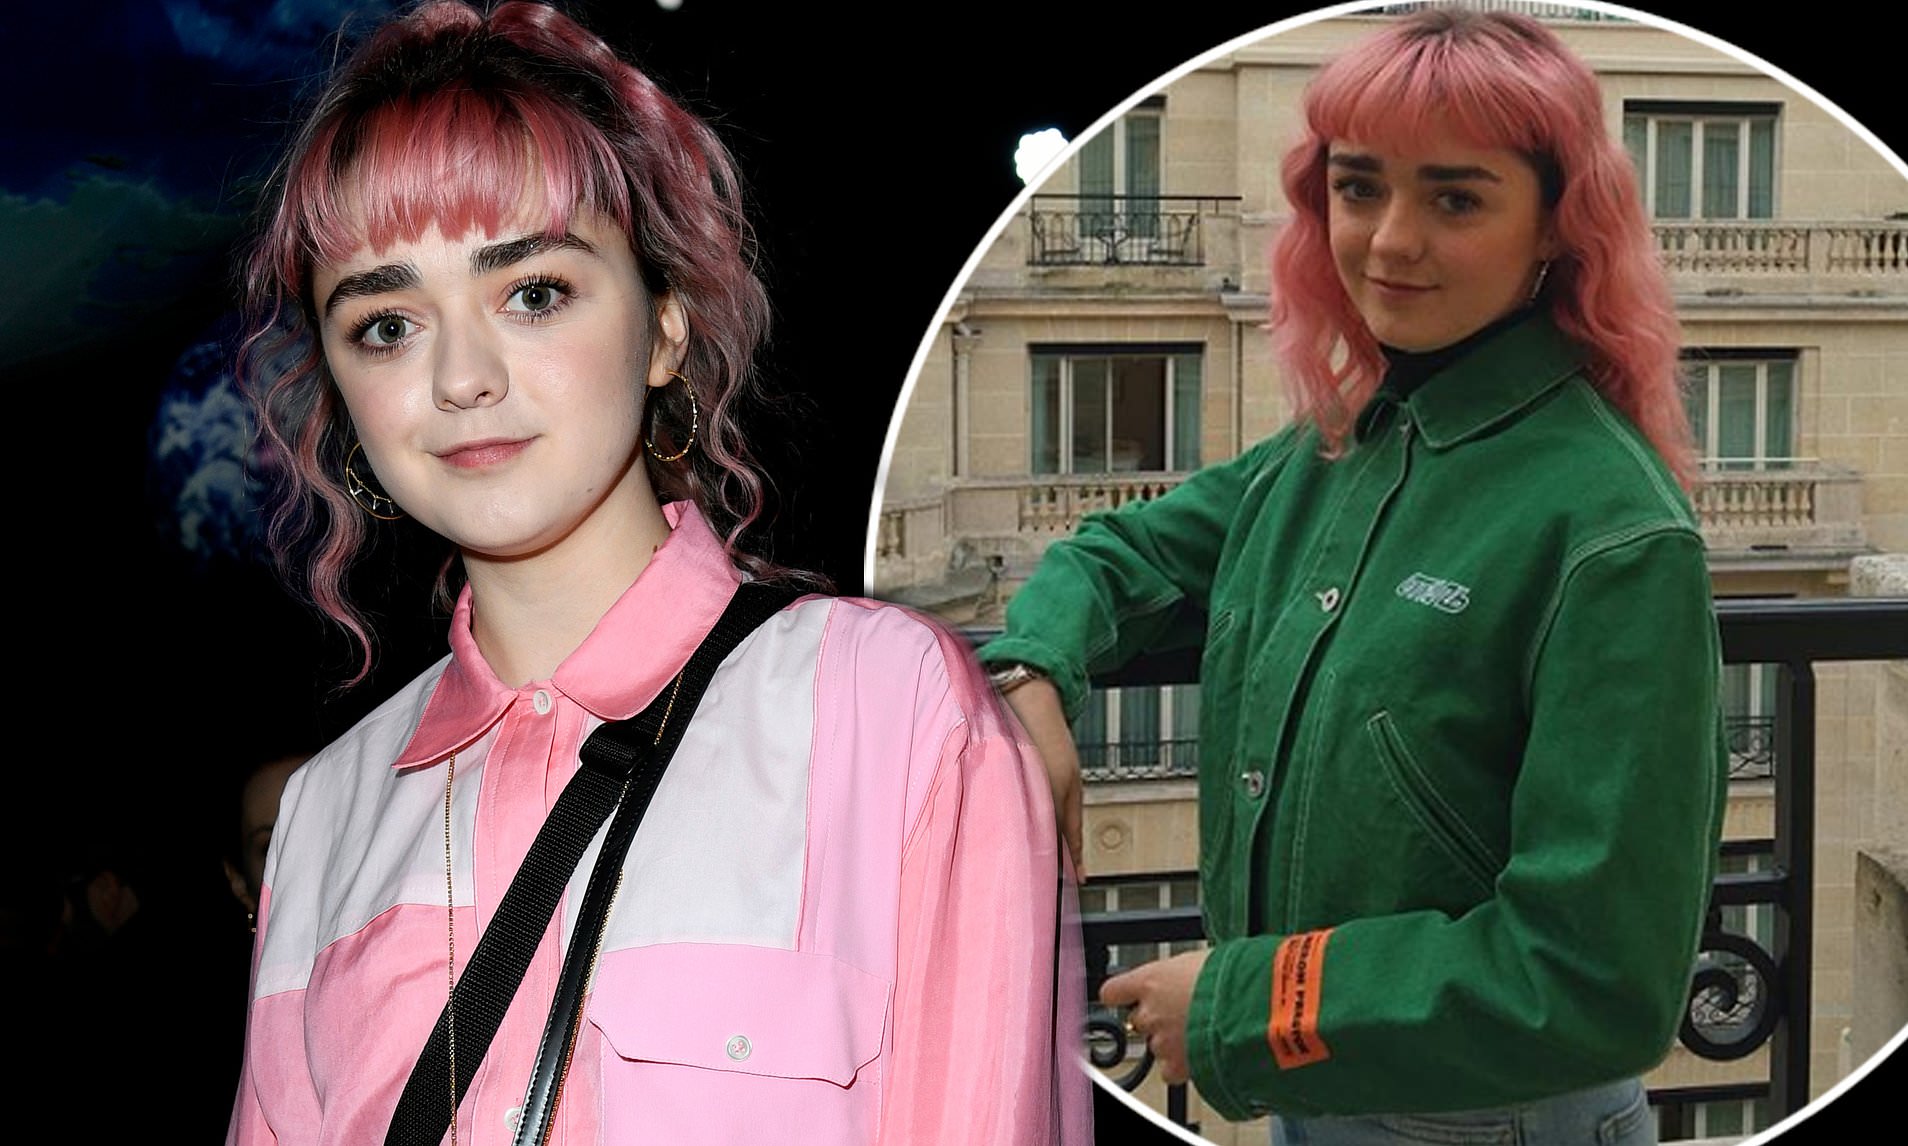 Maisie Williams Pink Hair Wallpapers